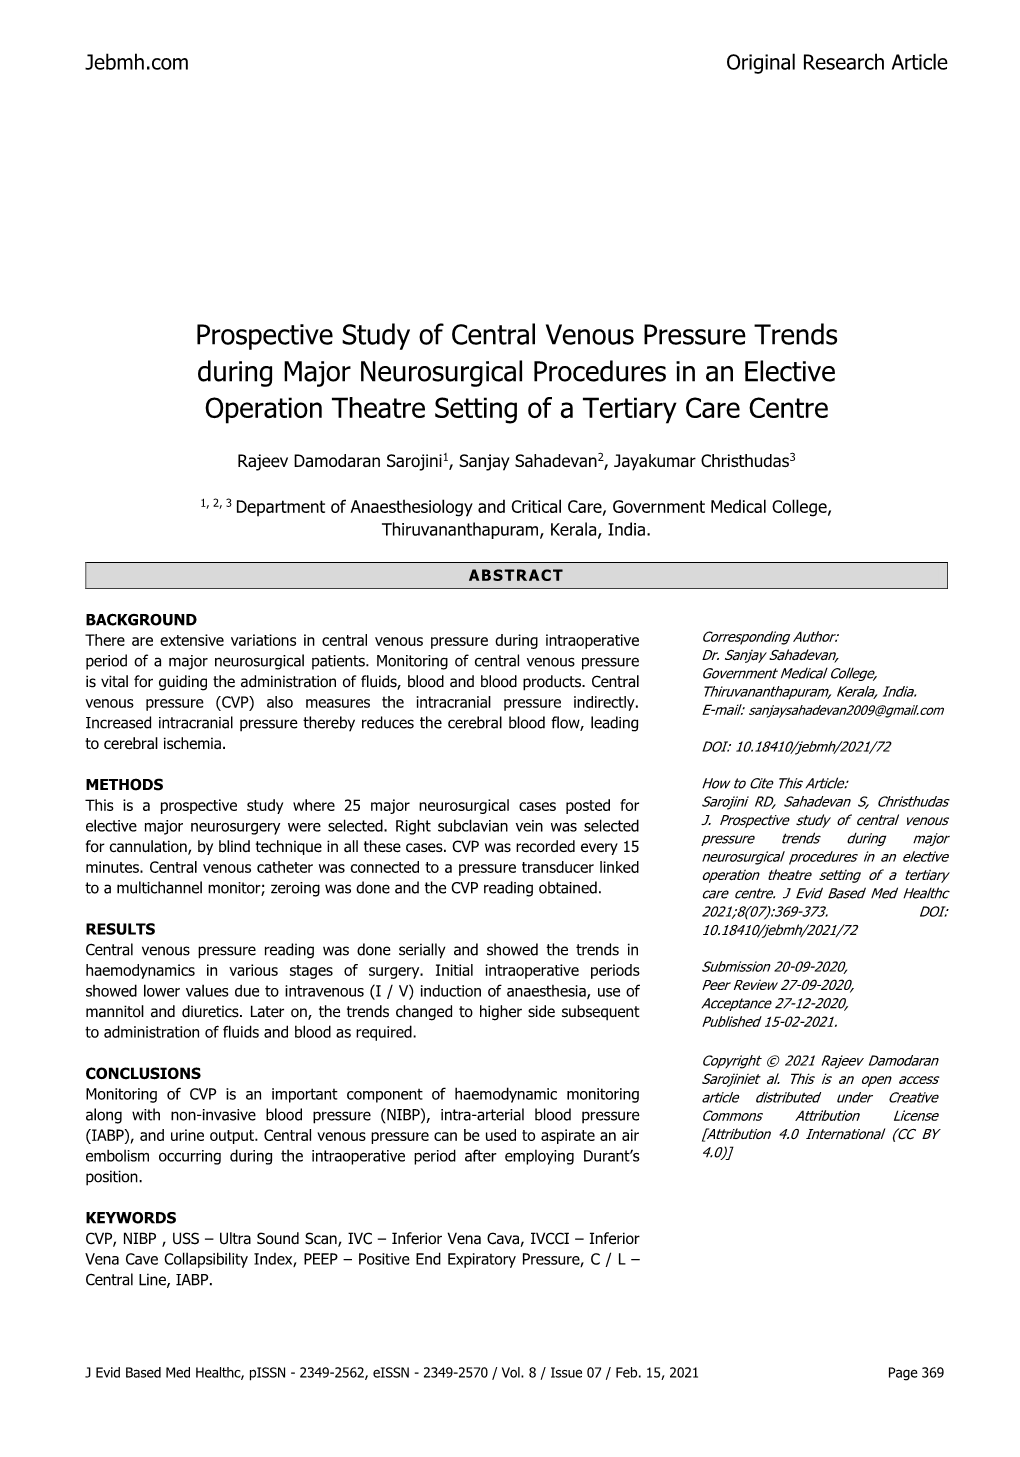 Prospective Study of Central Venous Pressure Trends During Major Neurosurgical Procedures in an Elective Operation Theatre Setting of a Tertiary Care Centre